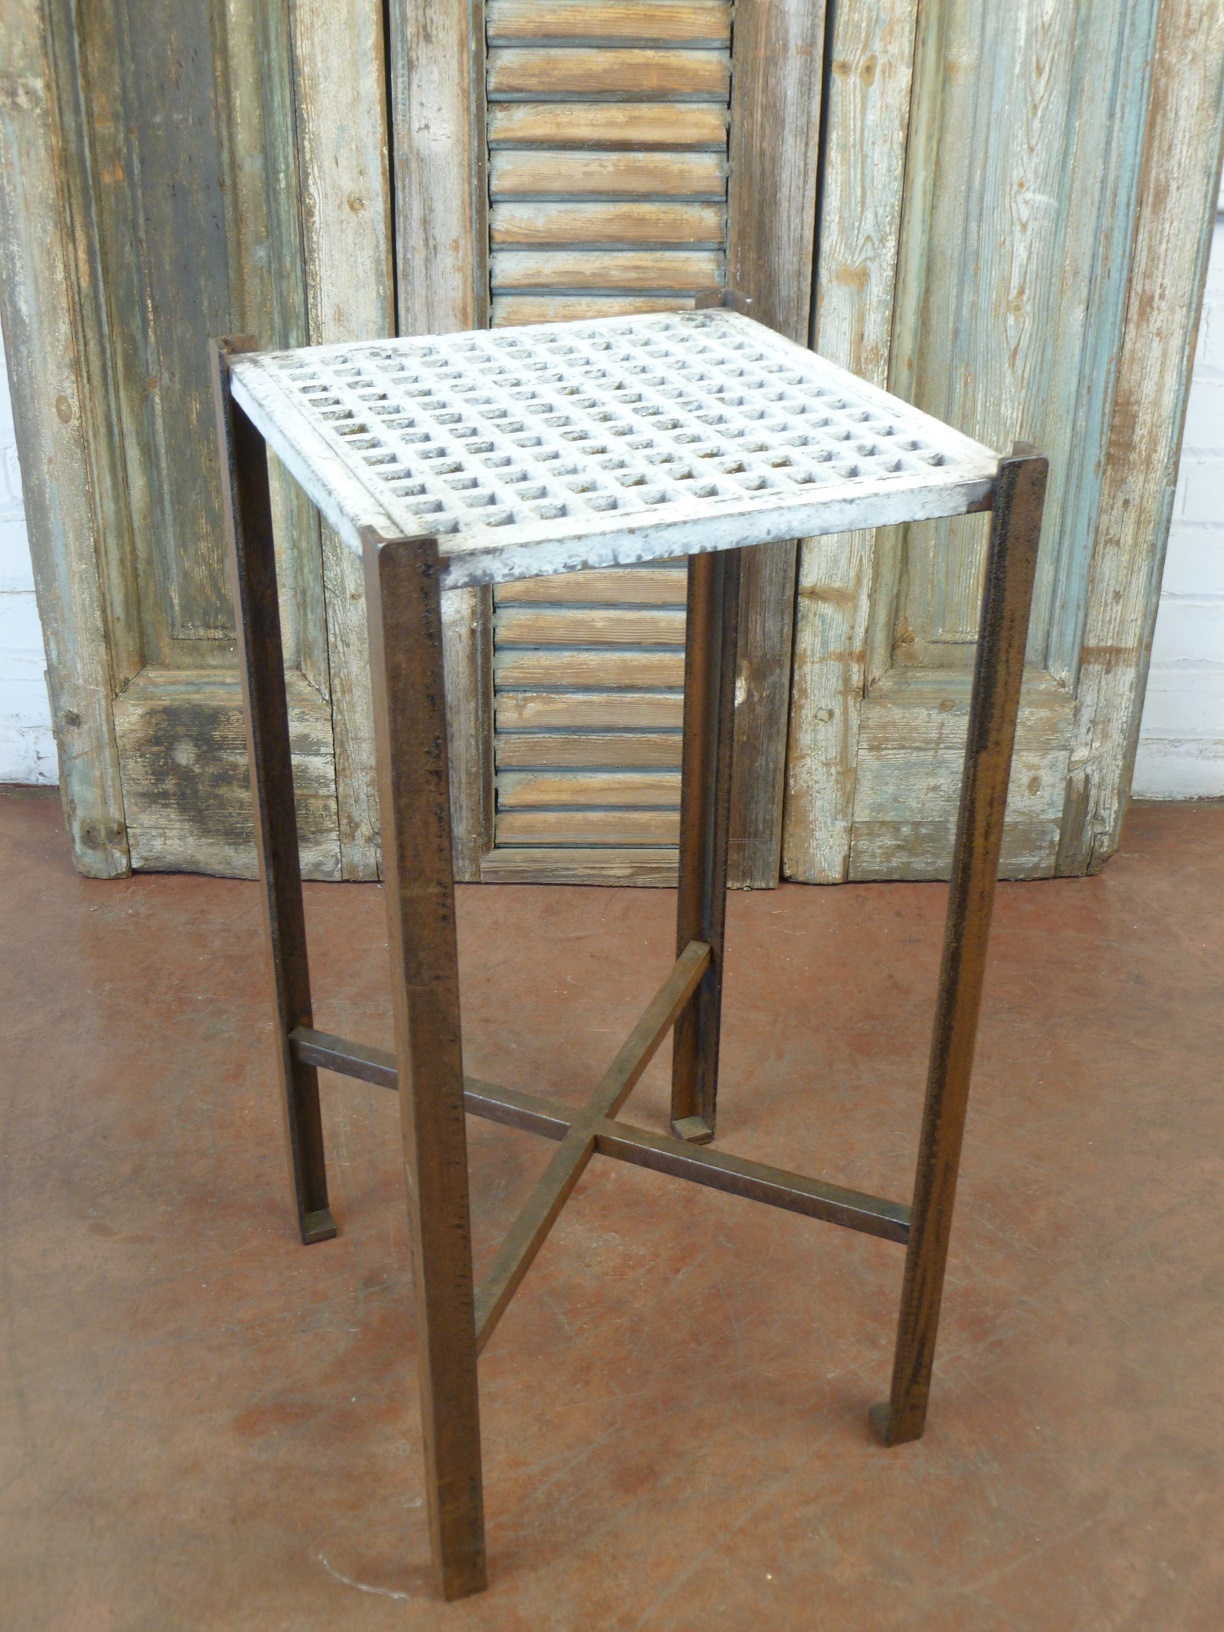 Custom iron drink/end table with a white, distressed finish.